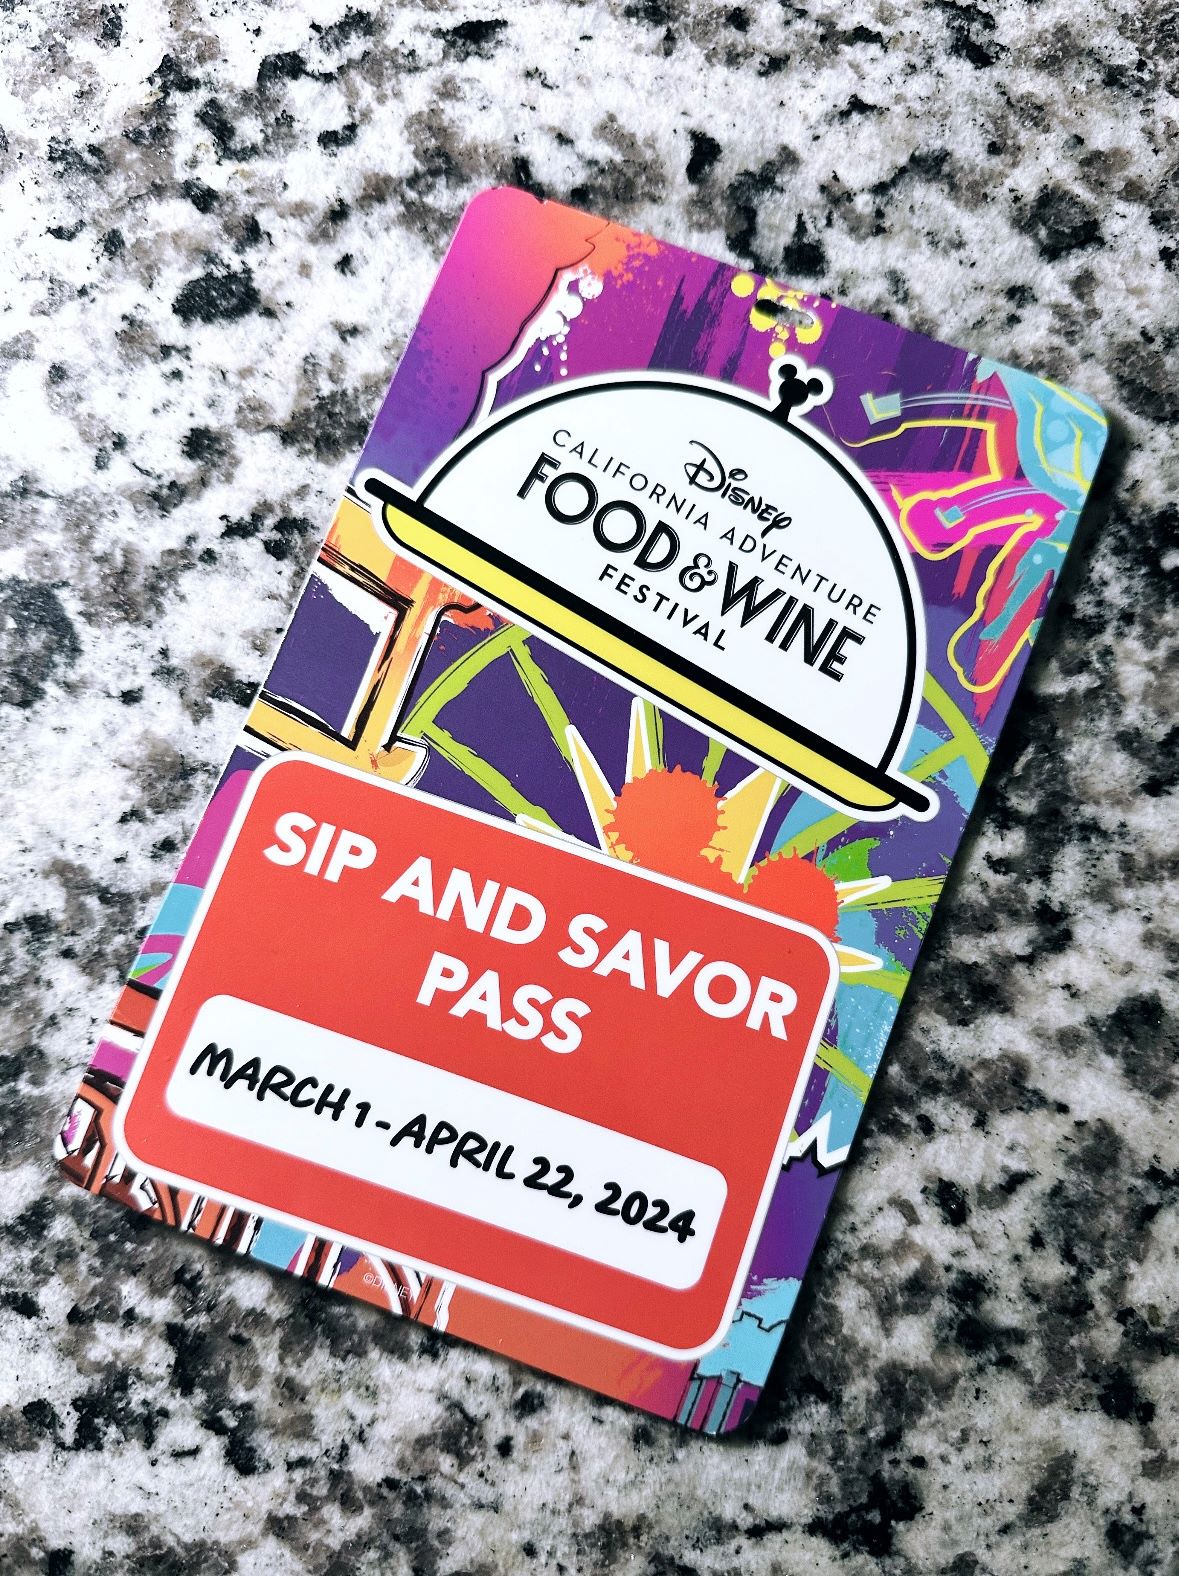 An image of the Disney California Adventure Food & Wine Festival Sip and Savor pass.